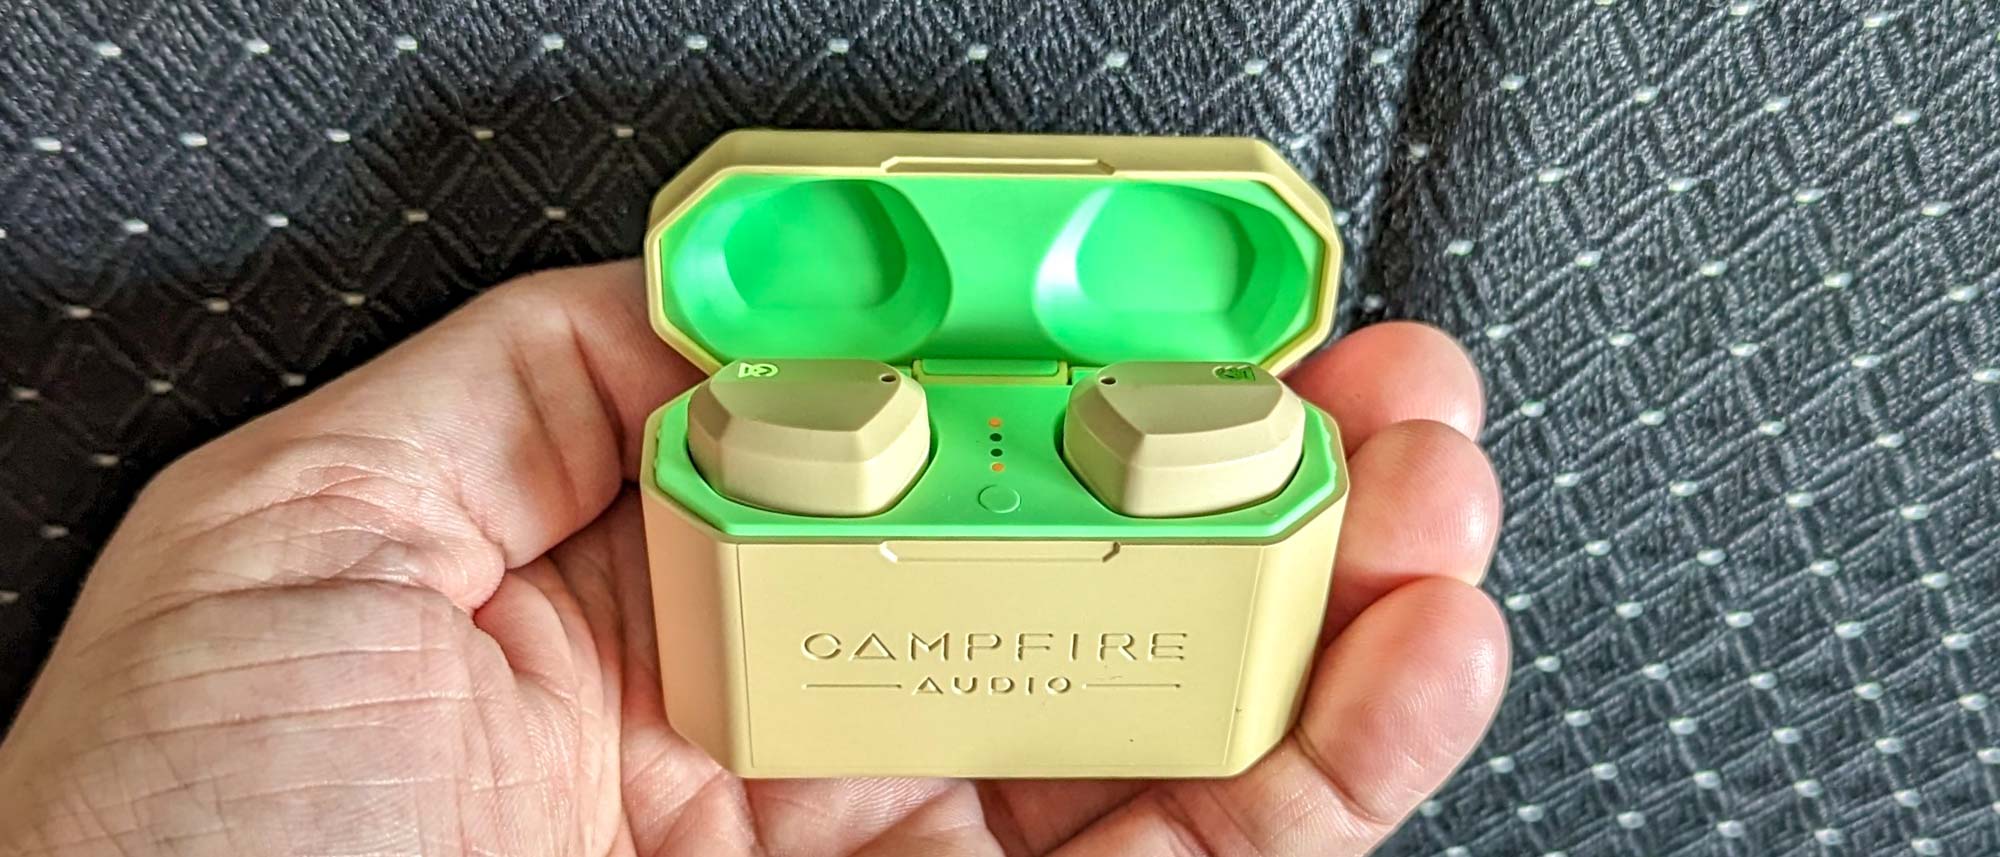 These $249 Campfire Audio wireless buds destroy the AirPods on 